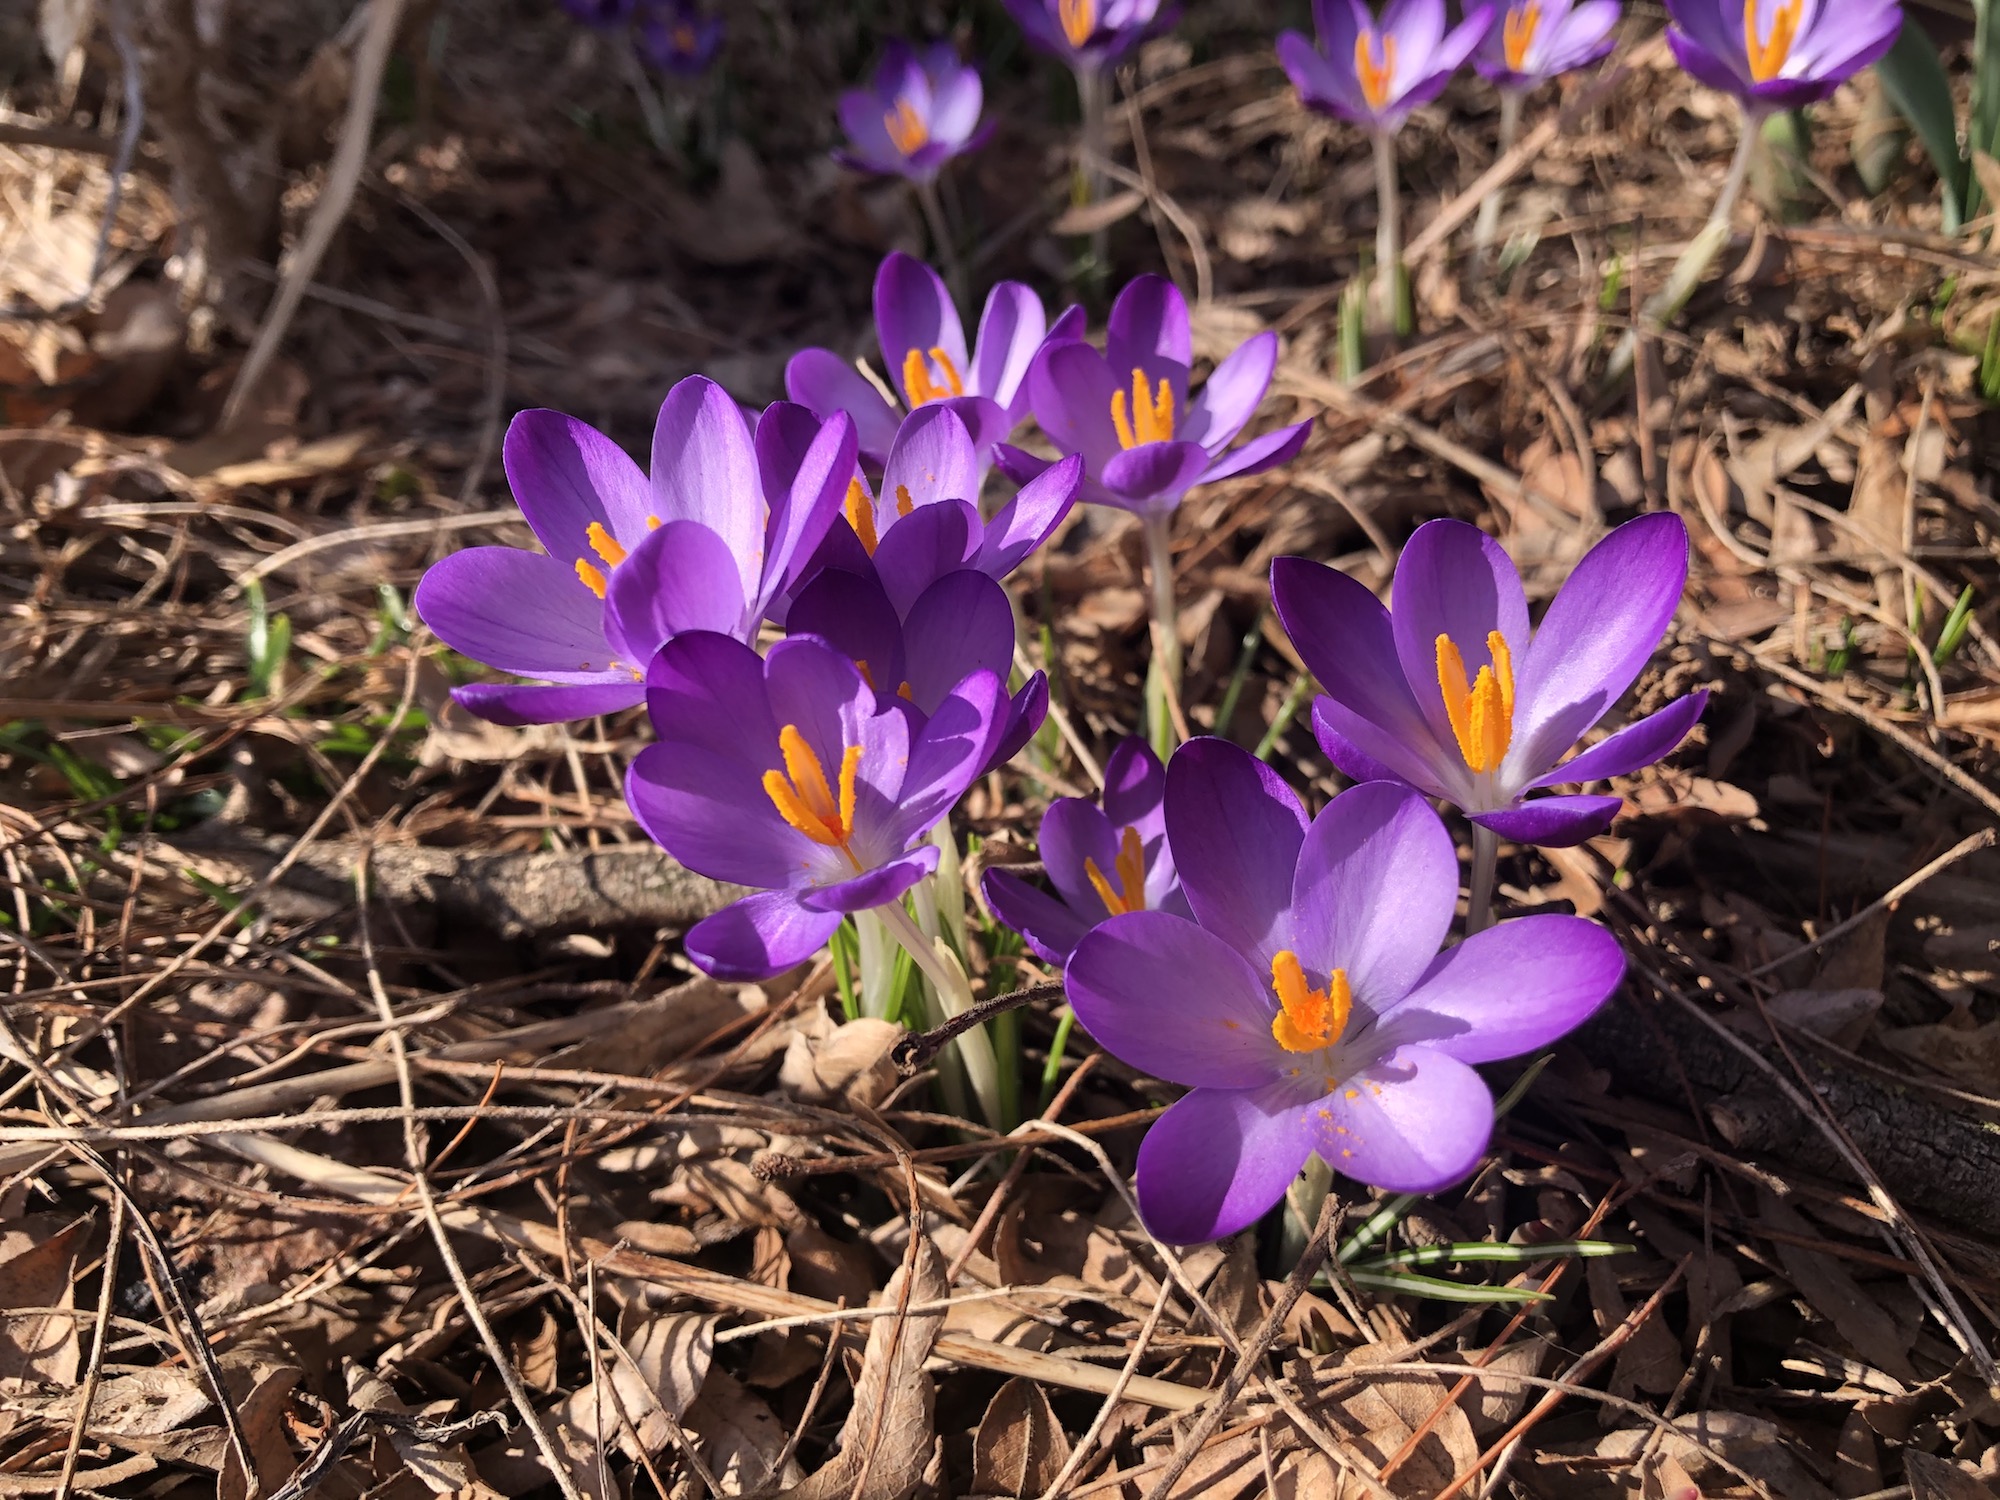 Crocus next to Thoreau Elementary wall on March 5, 2021.